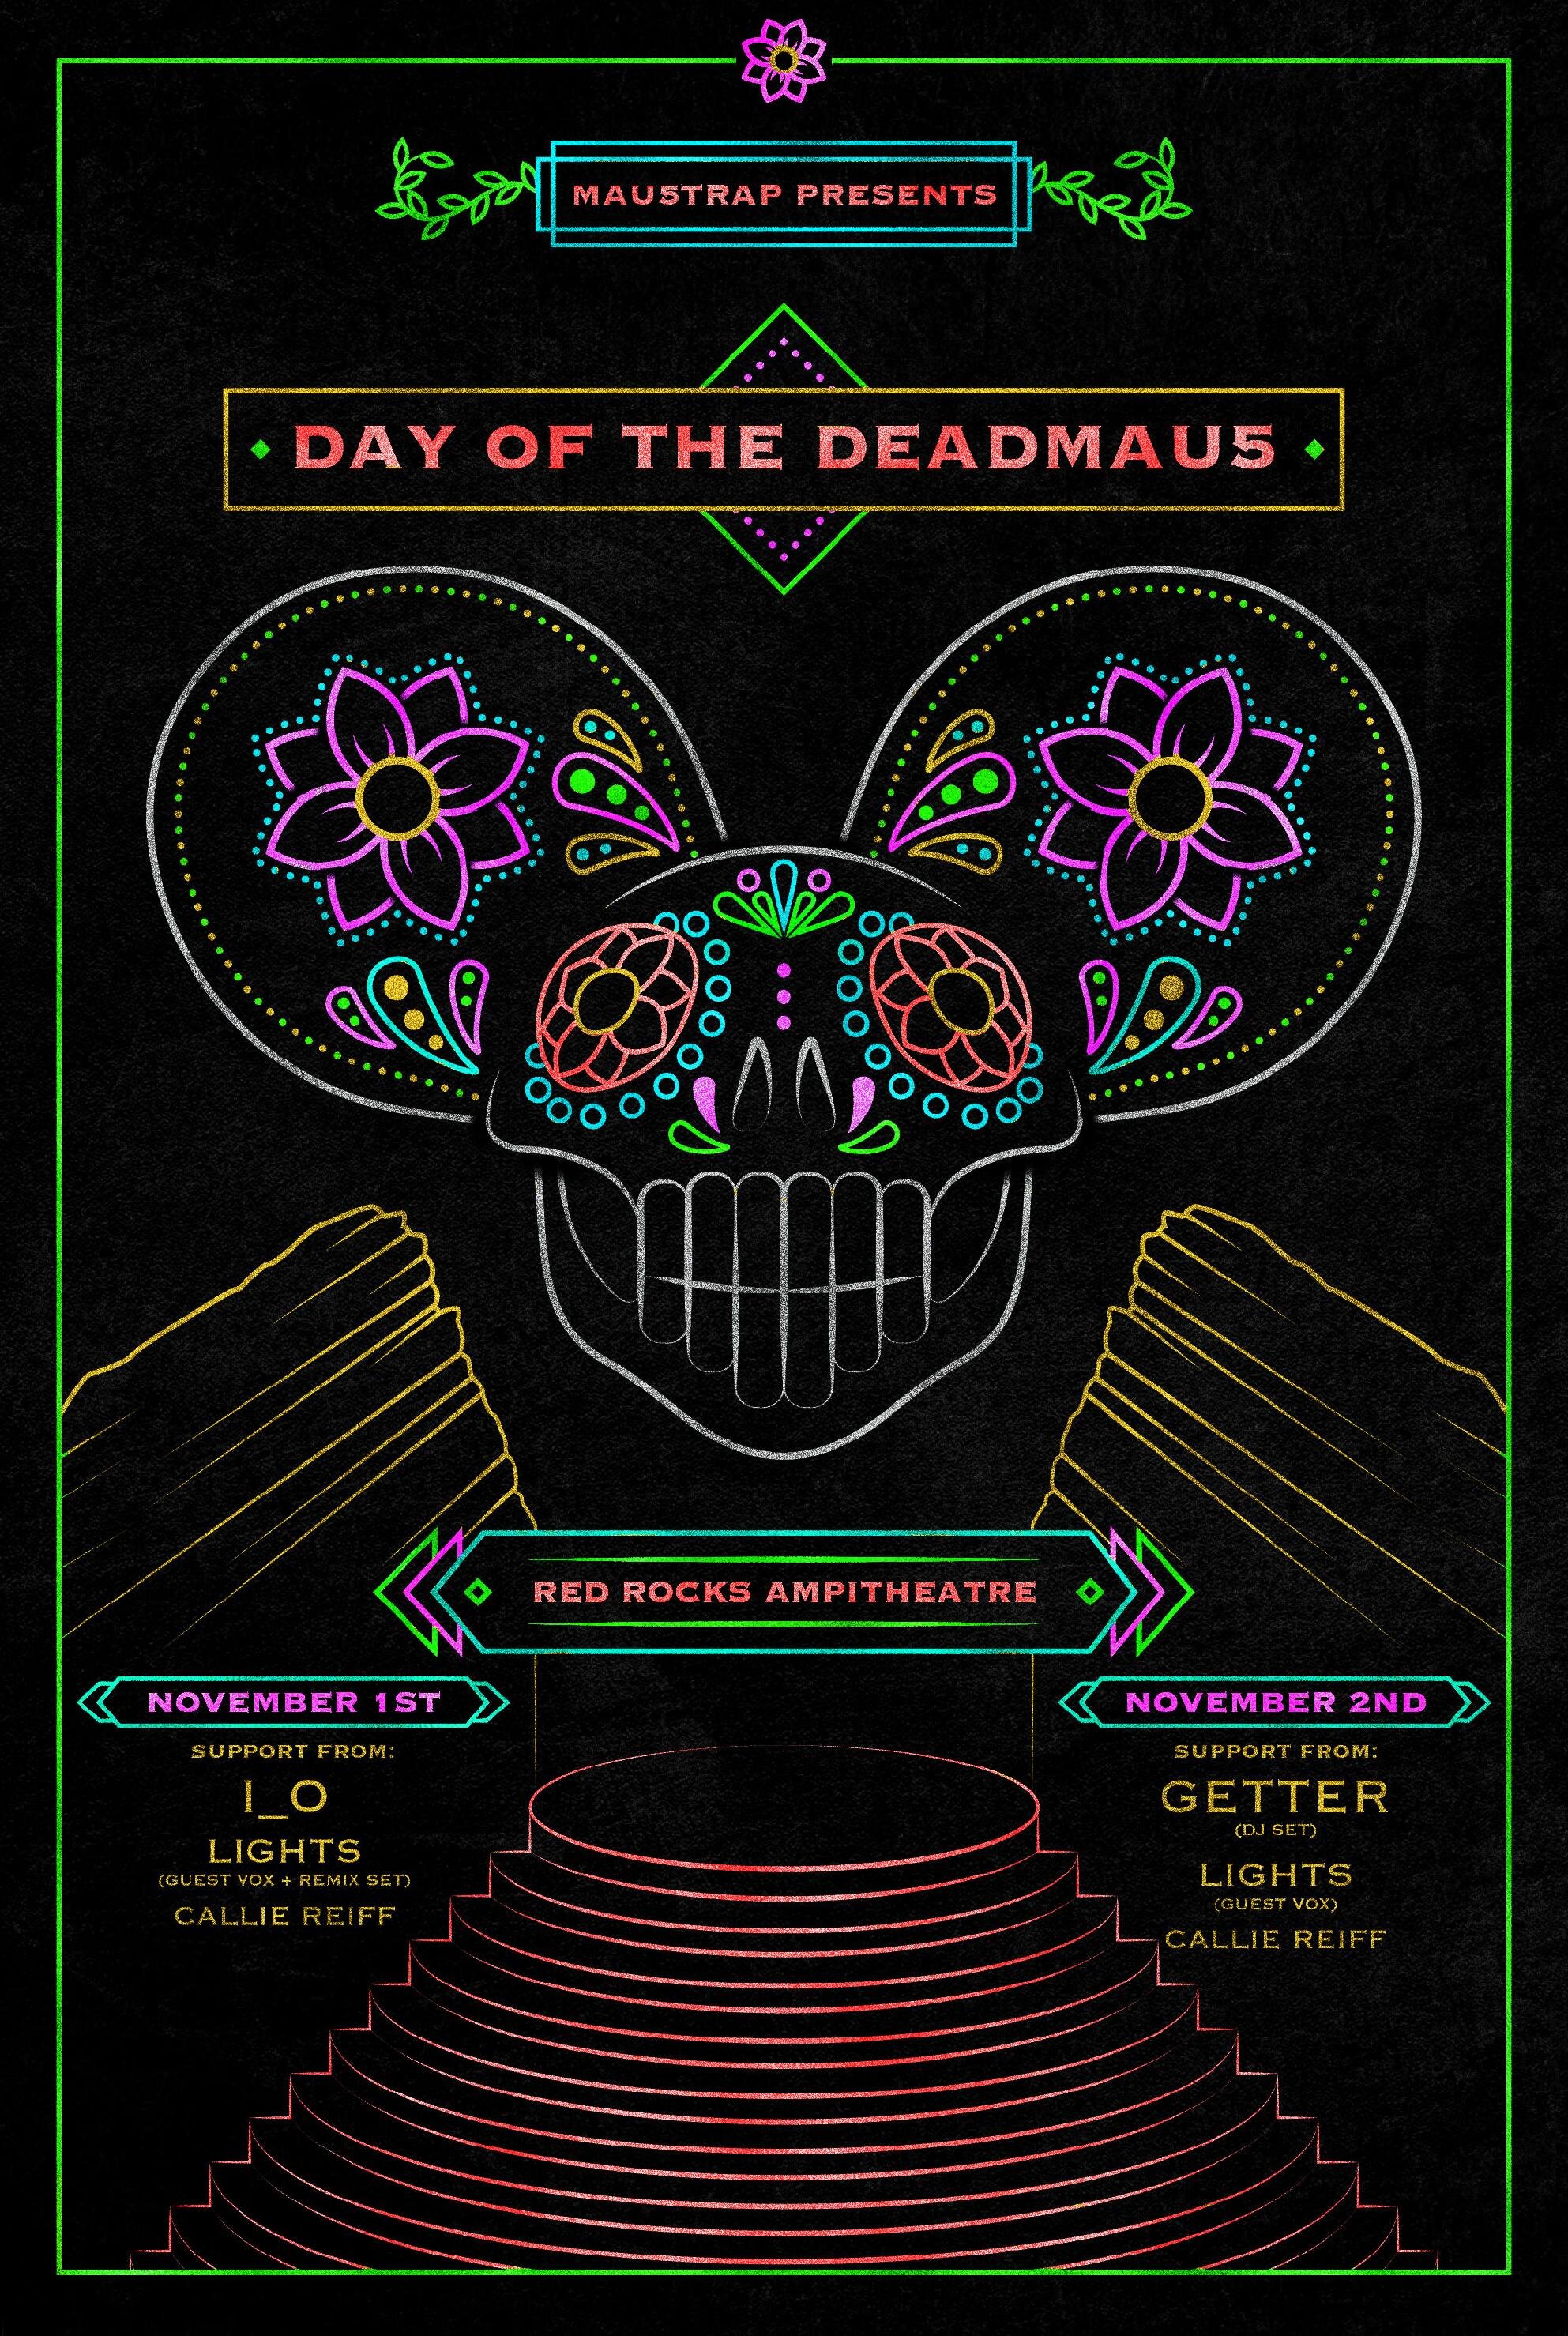 Mau5trap Presents Day Of The Deadmau5 At Red Rocks Amphitheater Brphoto